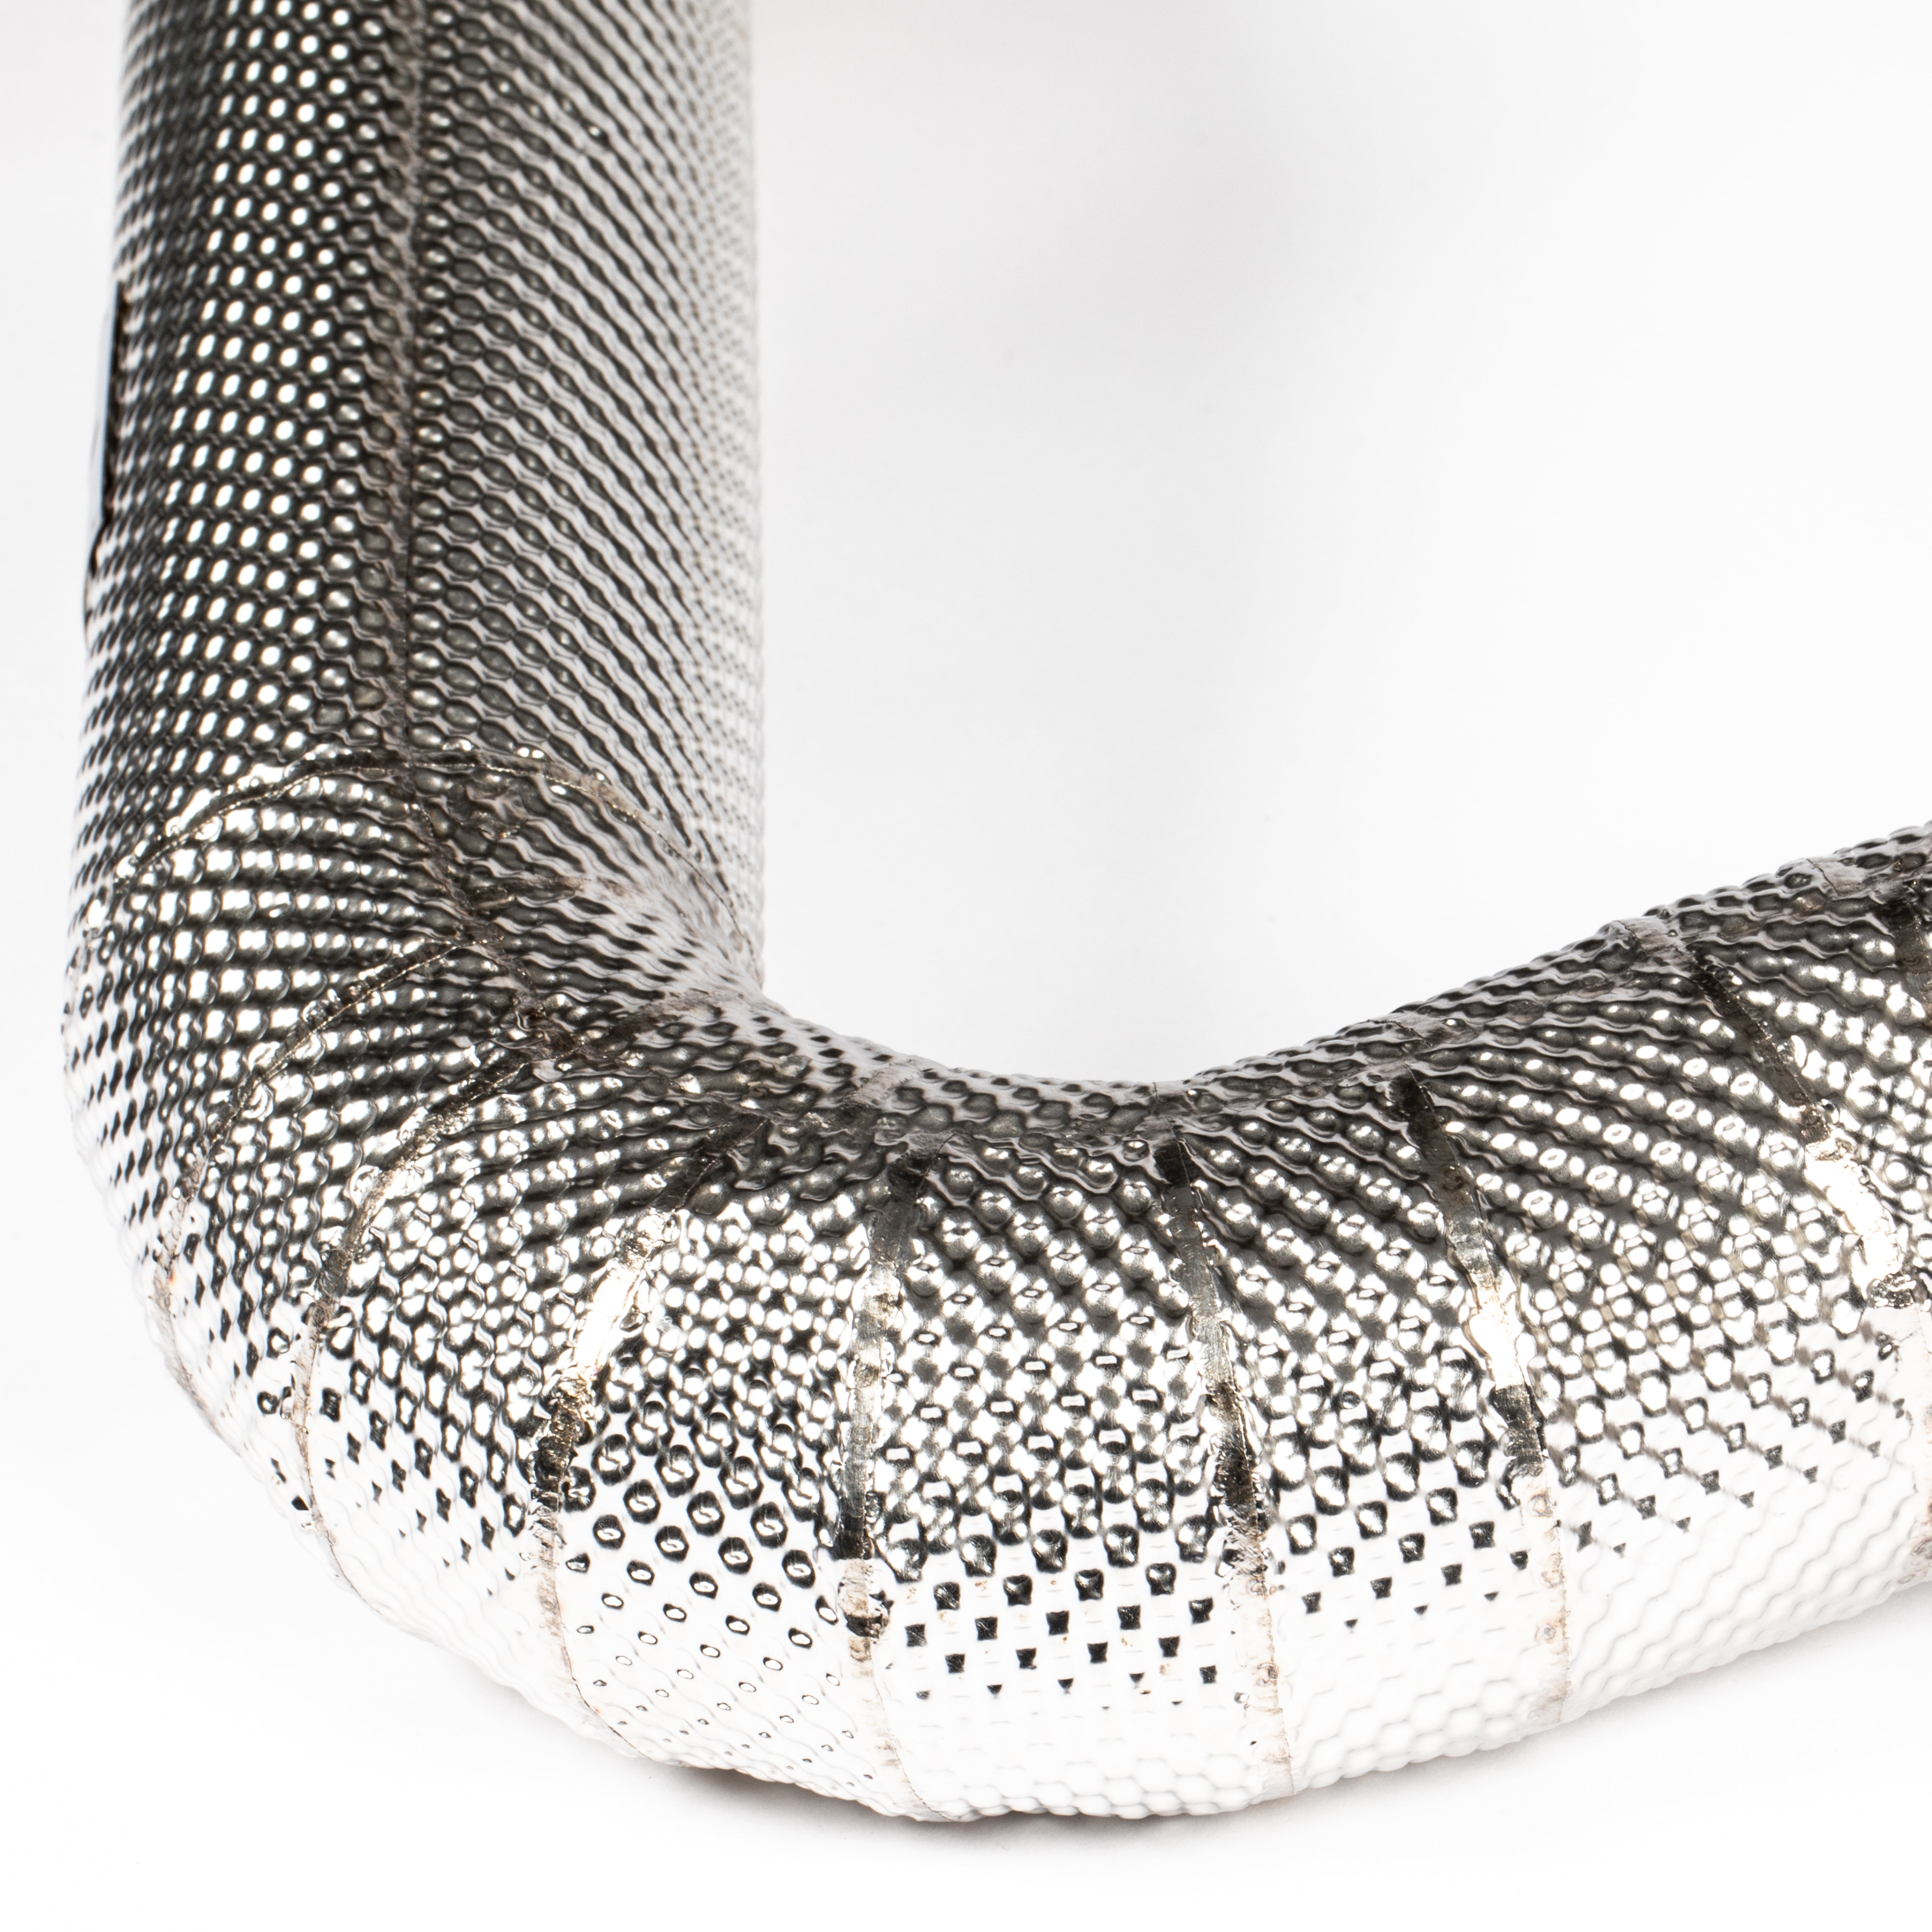 TITANIUM SUPERLIGHT RACE PIPE (CATTED / NON SILENCED)